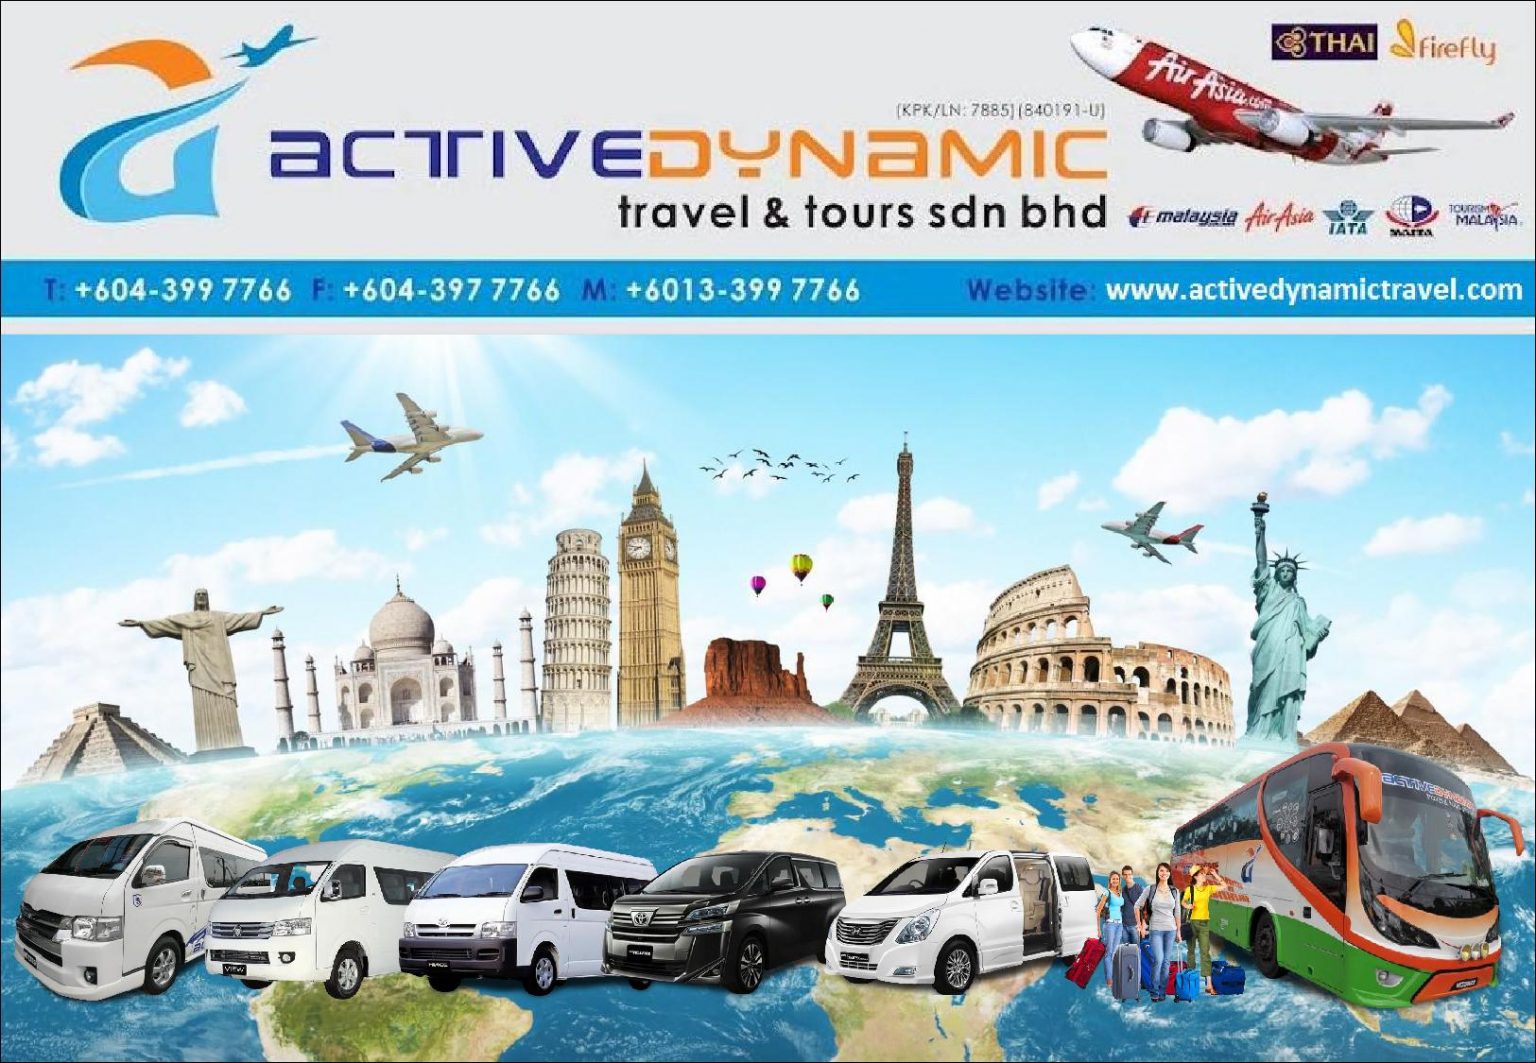 leading travel planners sdn bhd